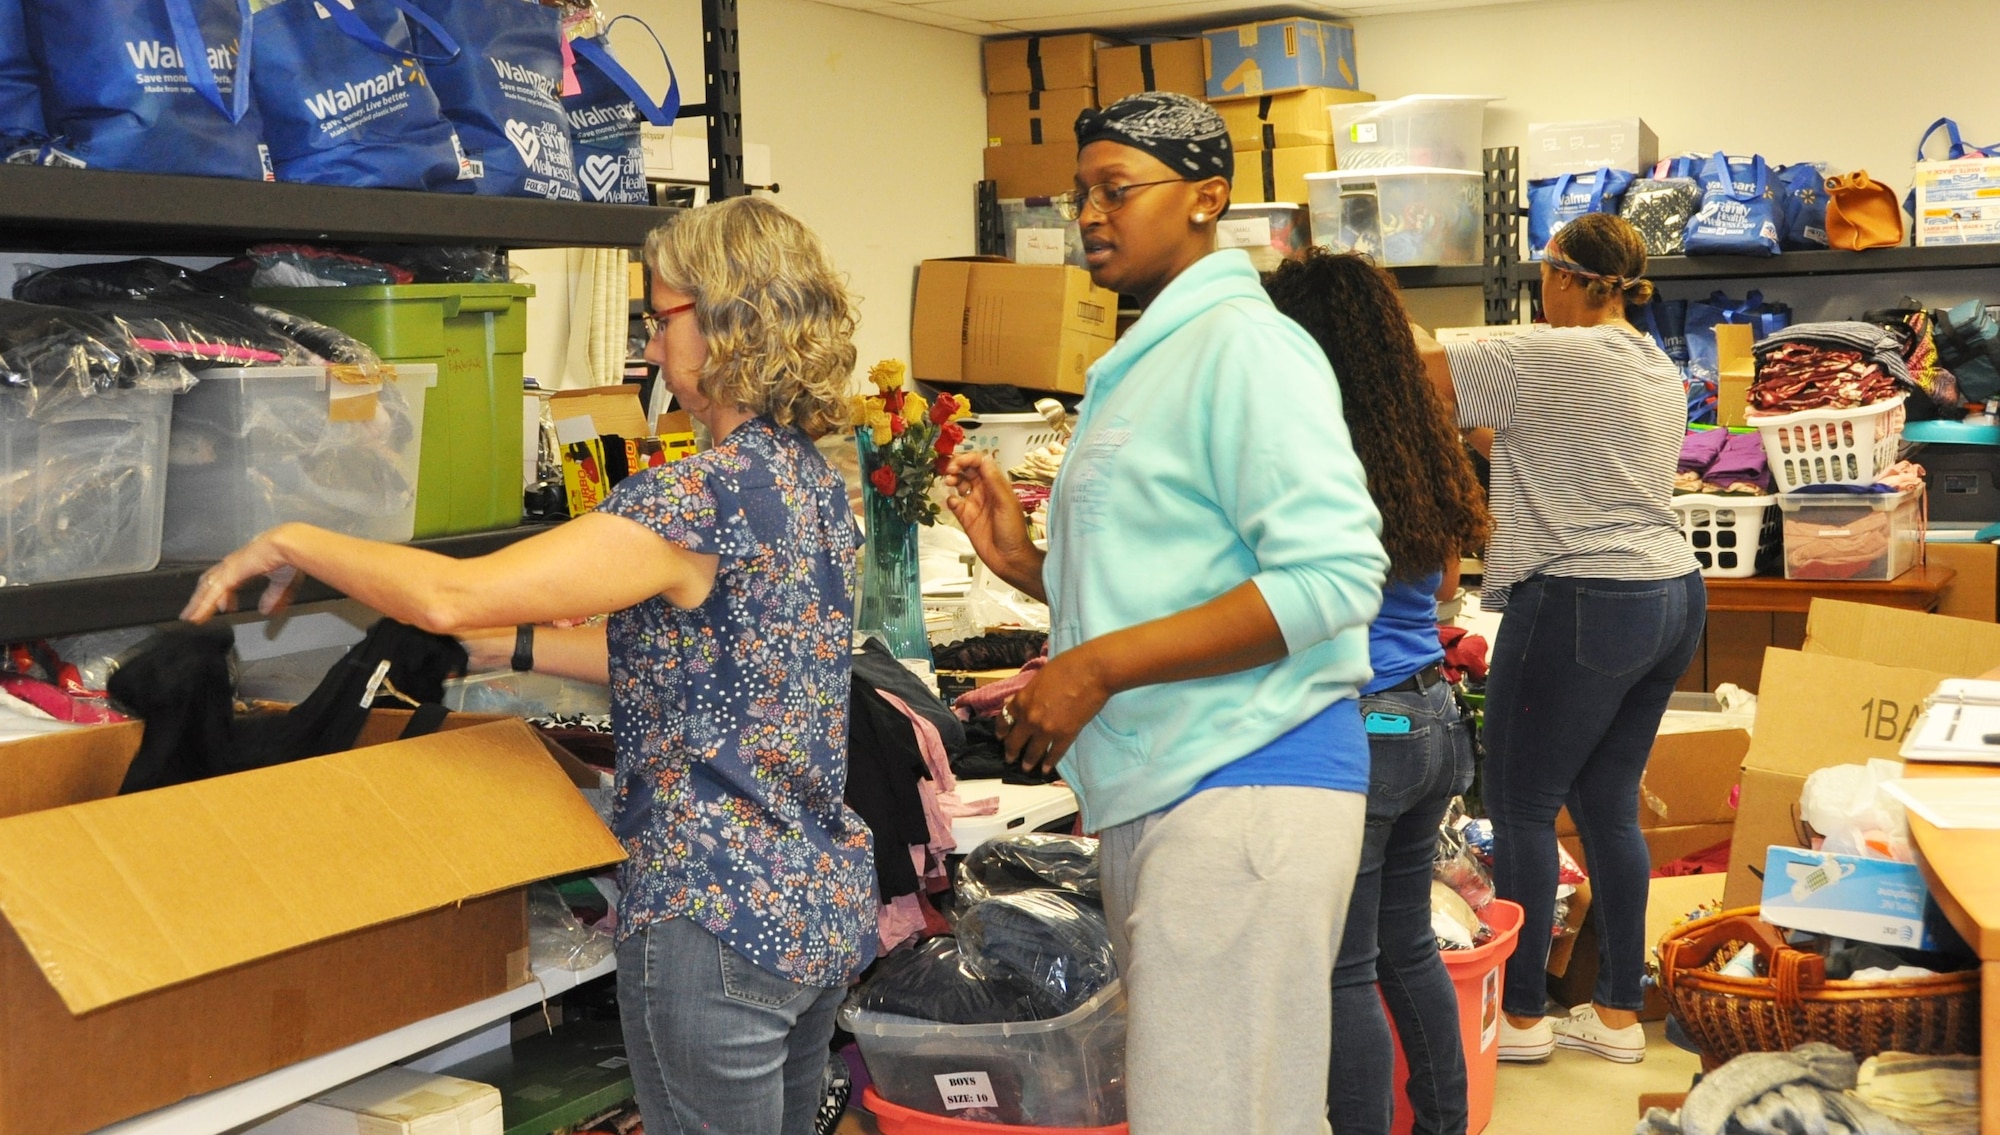 Volunteers (left to right) Lt. Col. Teresa Davies, Master Sgt. Faith Wells, Master Sgt. Julia Tovar  and Capt. Yolanda Seals sort clothing during a 340th Flying Training Group Sept. 11 community outreach event at the San Antonio, Texas Family Violence Prevention Services/Battered Women and Children’s Shelter’s Donation Center. (U.S. Air Force photo by Janis El Shabazz)